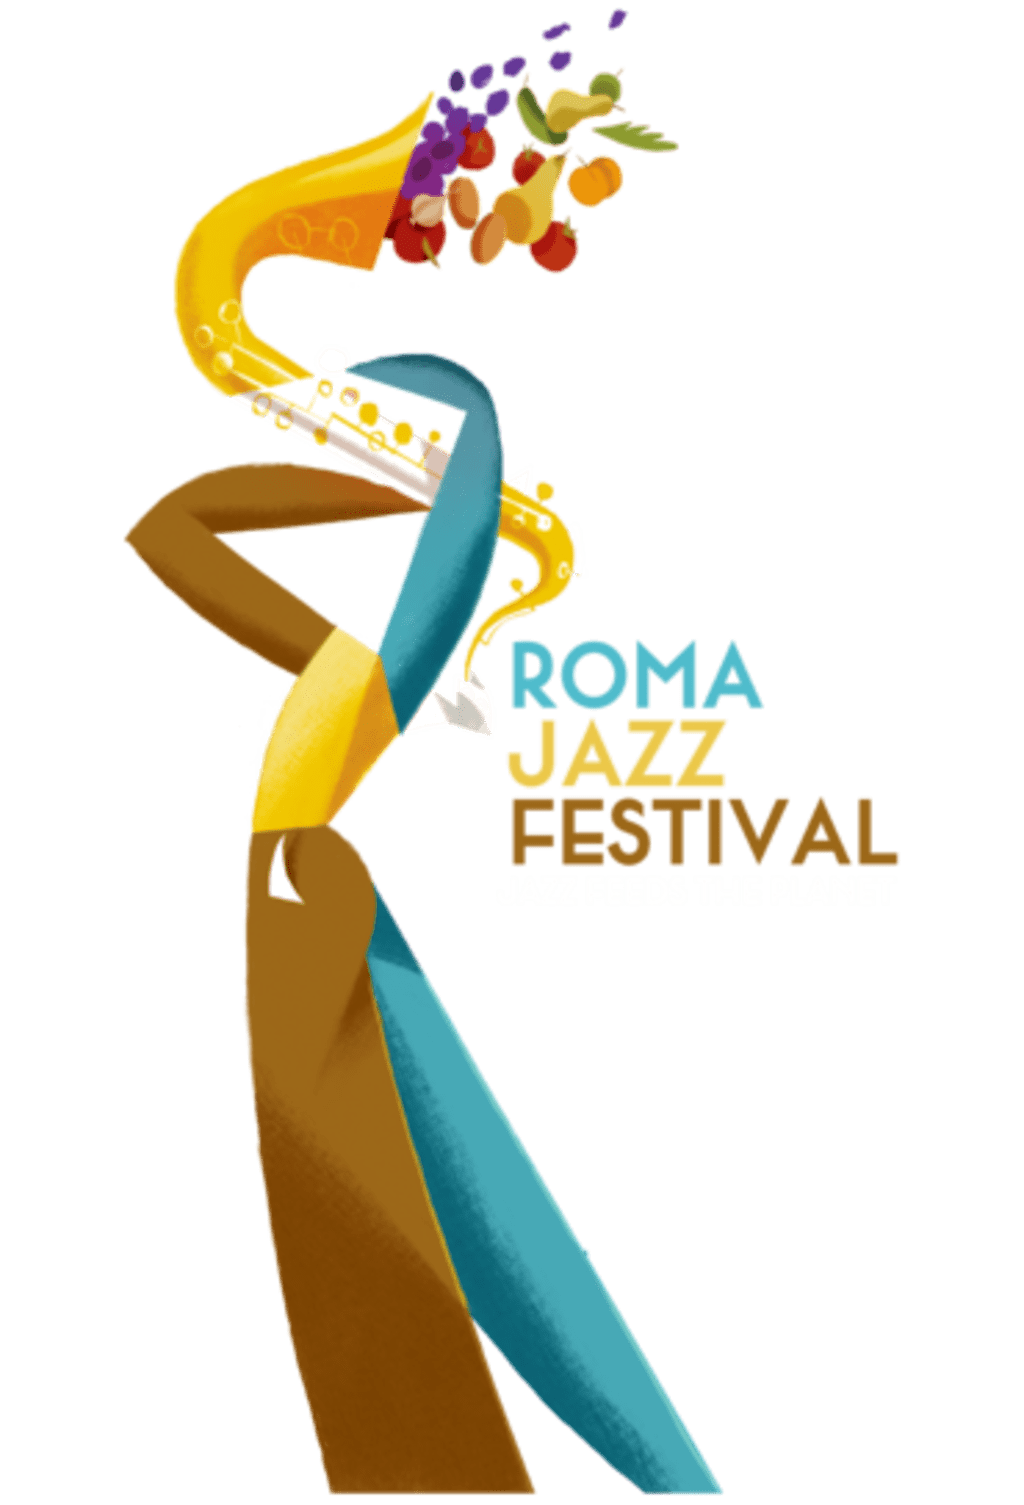 JAZZ FEEDS THE PLANET